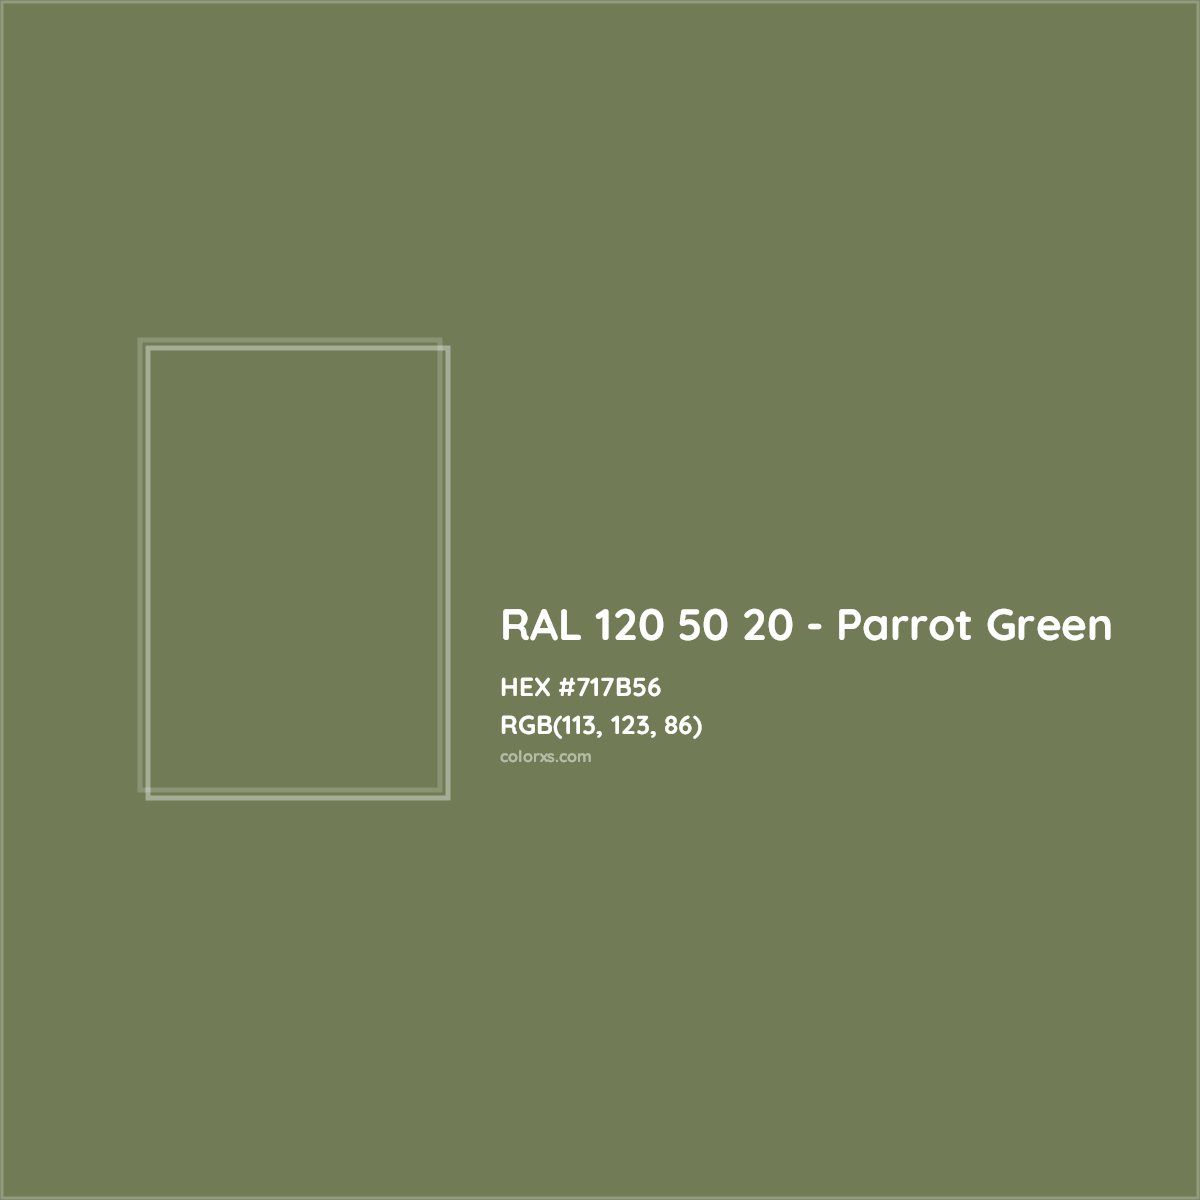 HEX #717B56 RAL 120 50 20 - Parrot Green CMS RAL Design - Color Code